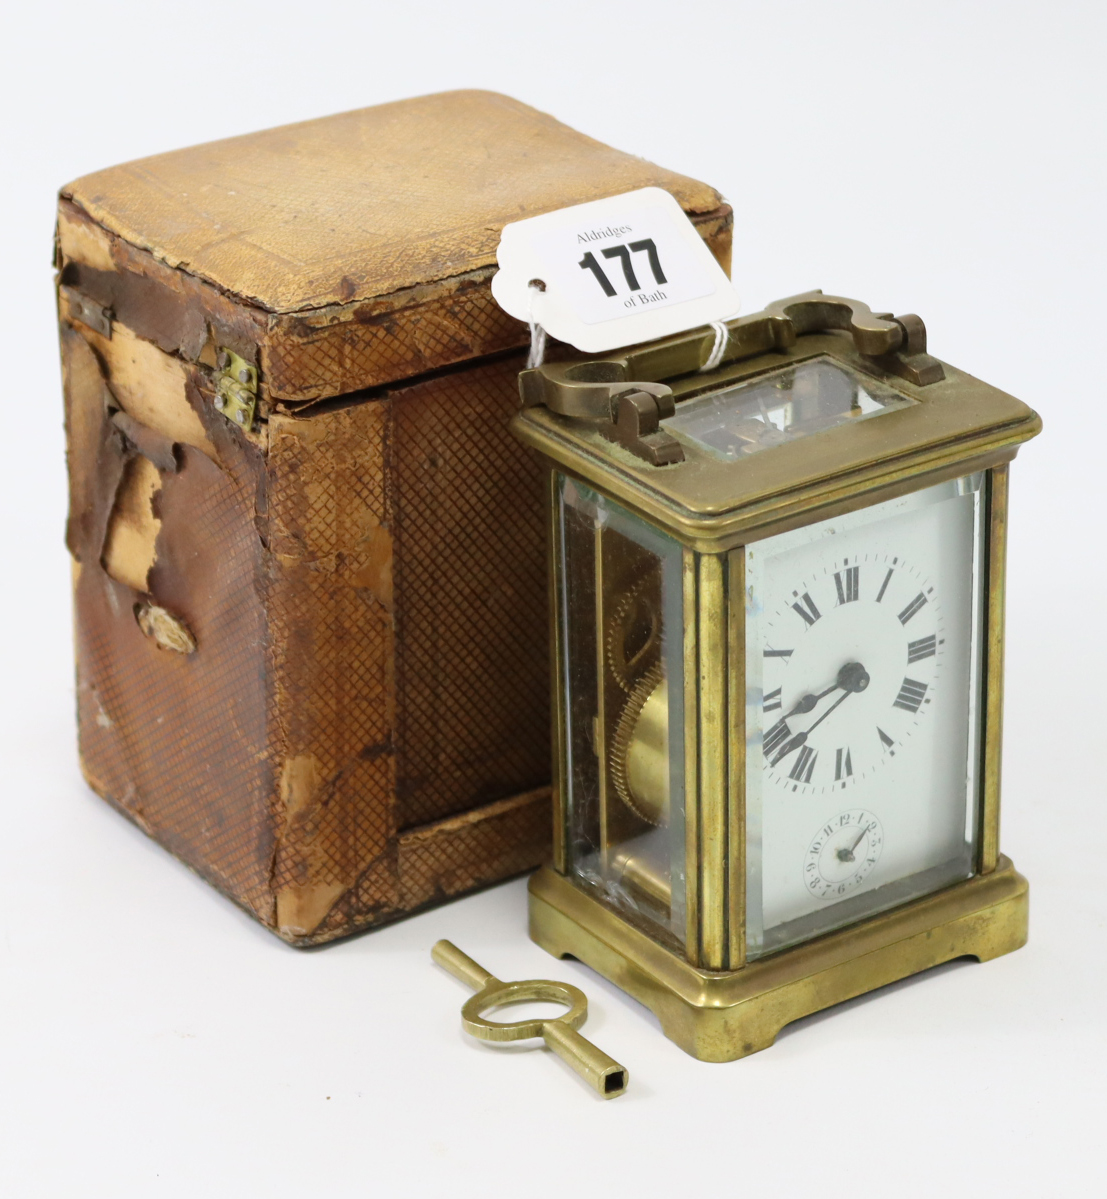 A French brass-cased carriage timepiece, 4¼” high, with travelling case (travelling case w.a.f.).